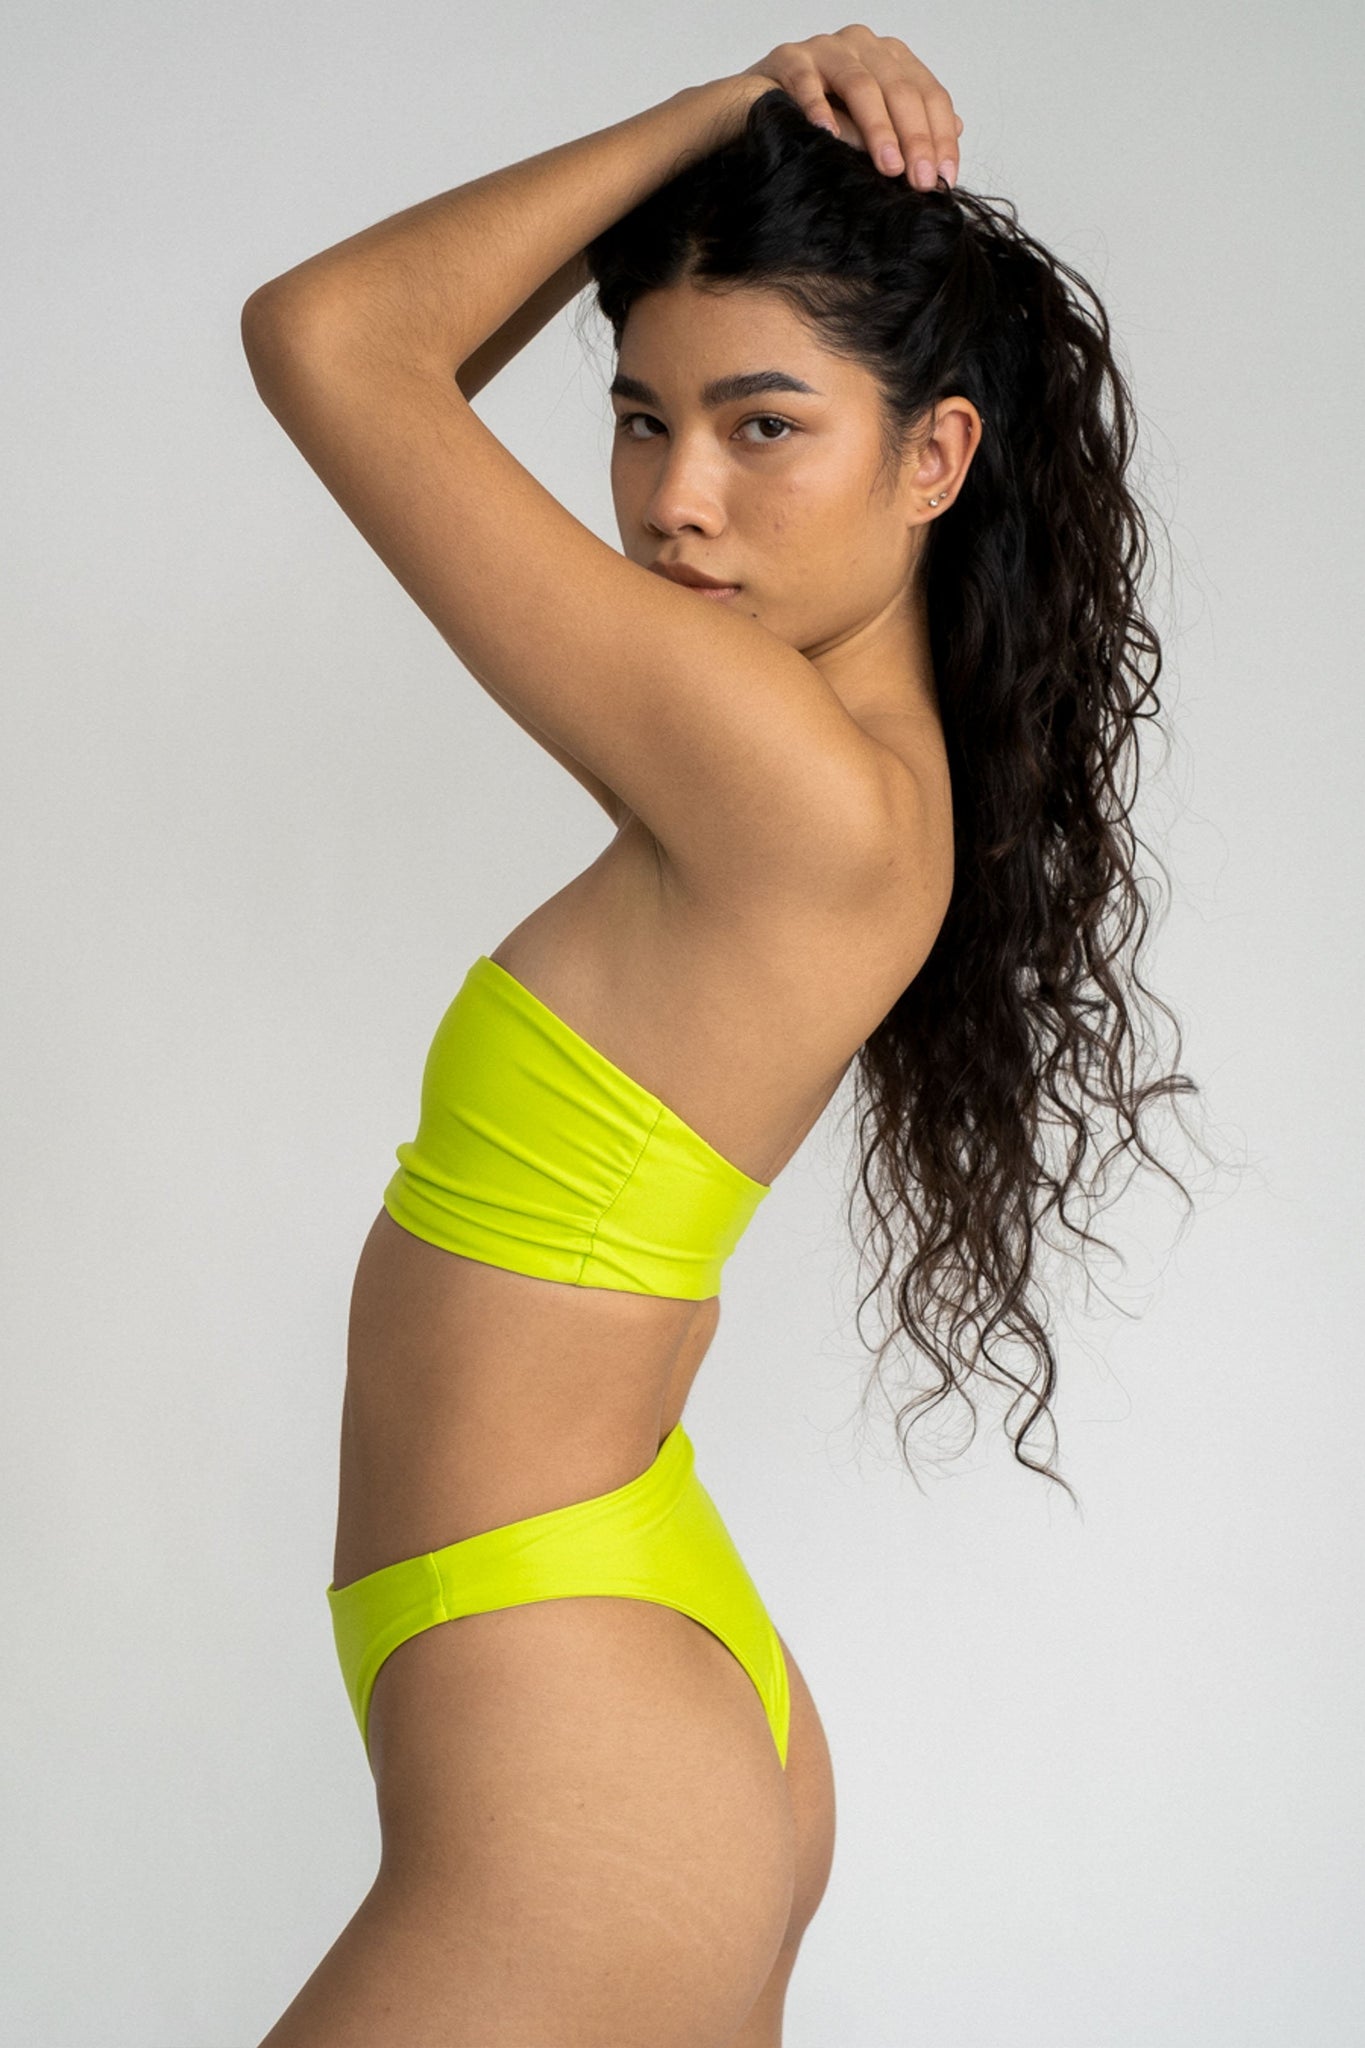 A woman standing to the side with her arms above her head wearing bright neon green high cut bikini bottoms with a matching bright green strapless bandeau bikini top.